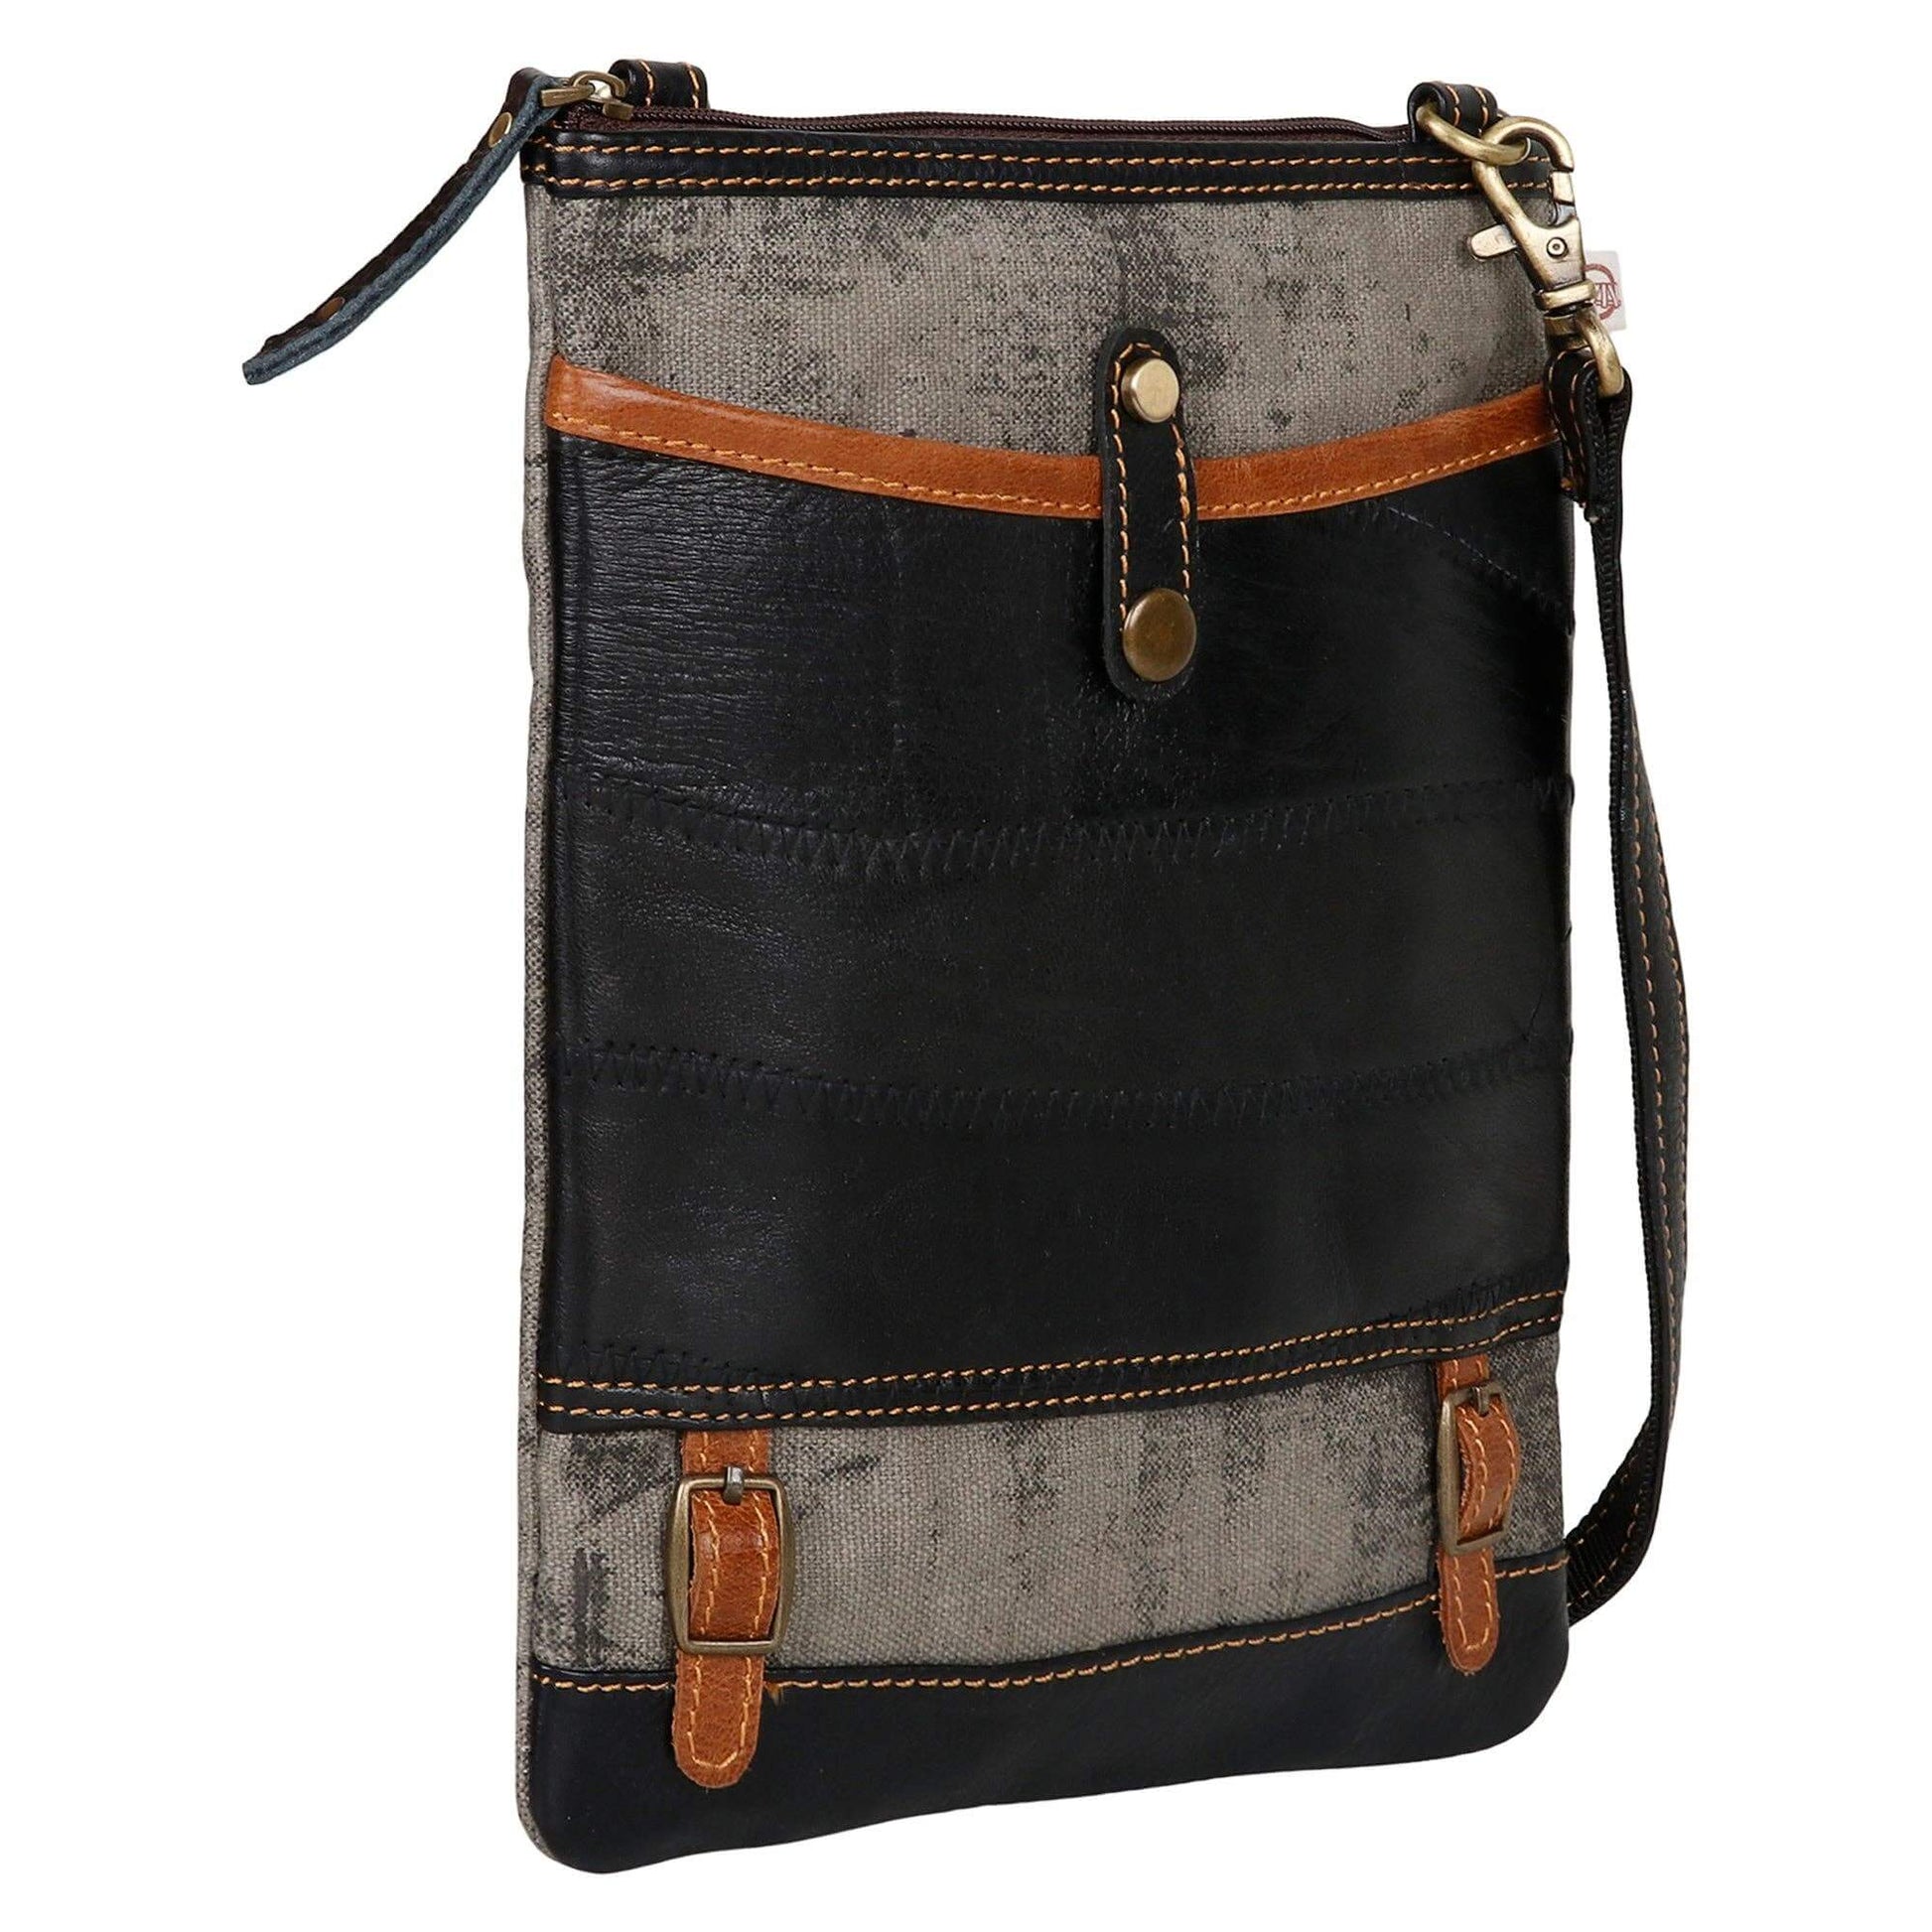 Vaan & Co. Patterson Grey and Black Crossbody Bag-Side View